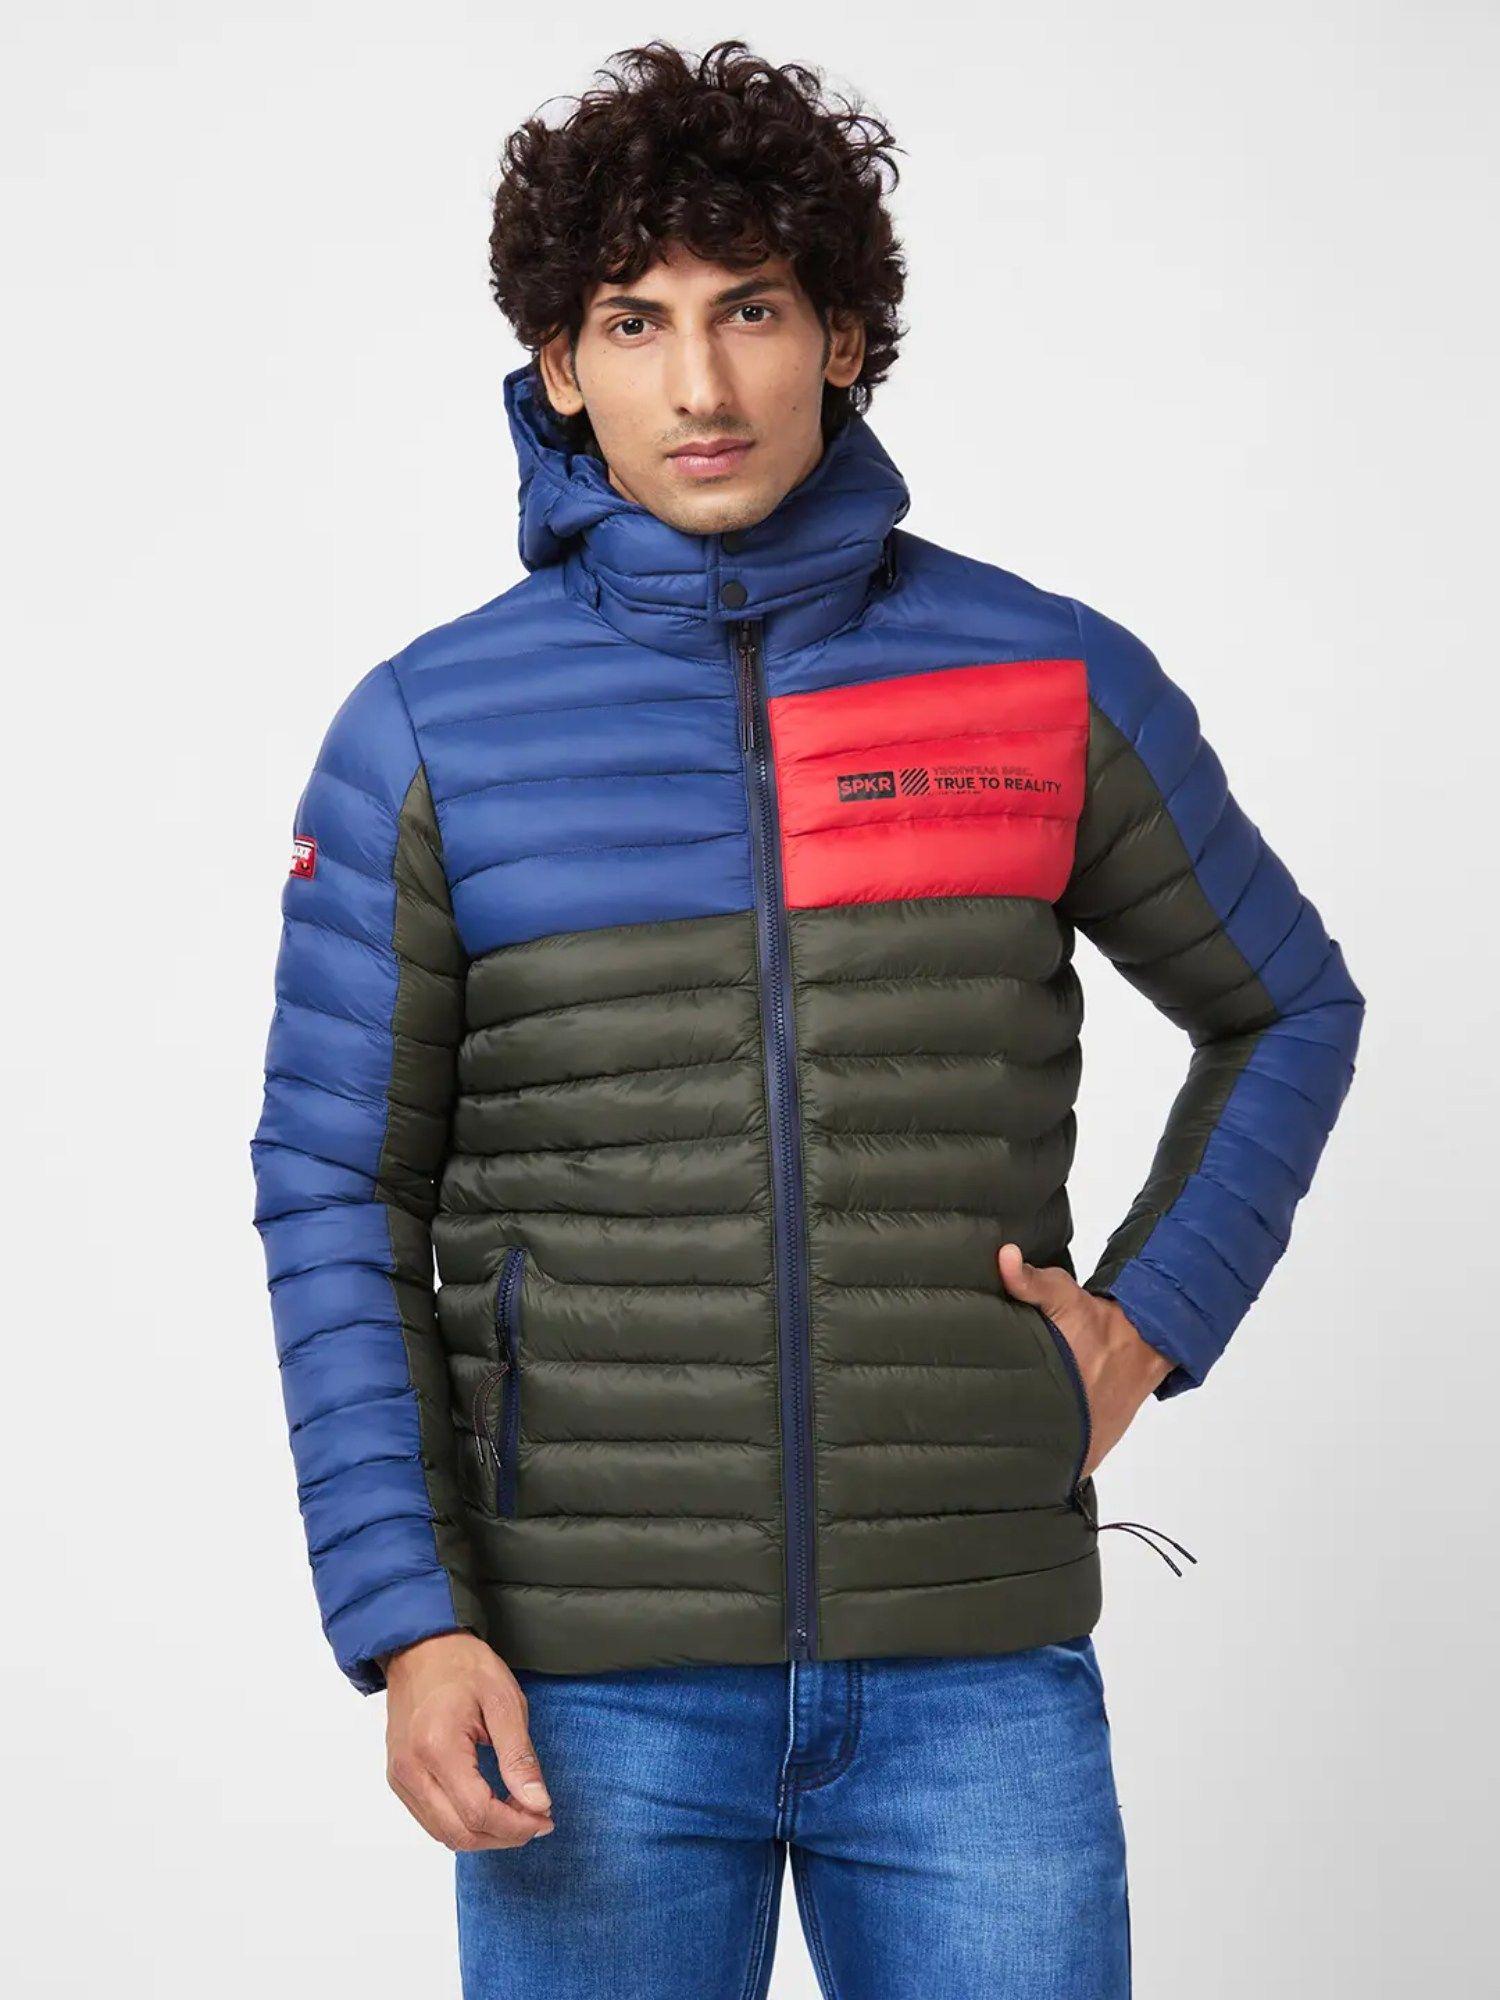 men's-color-blocked-puffer-jacket-with-embroidered-sleeve-badge